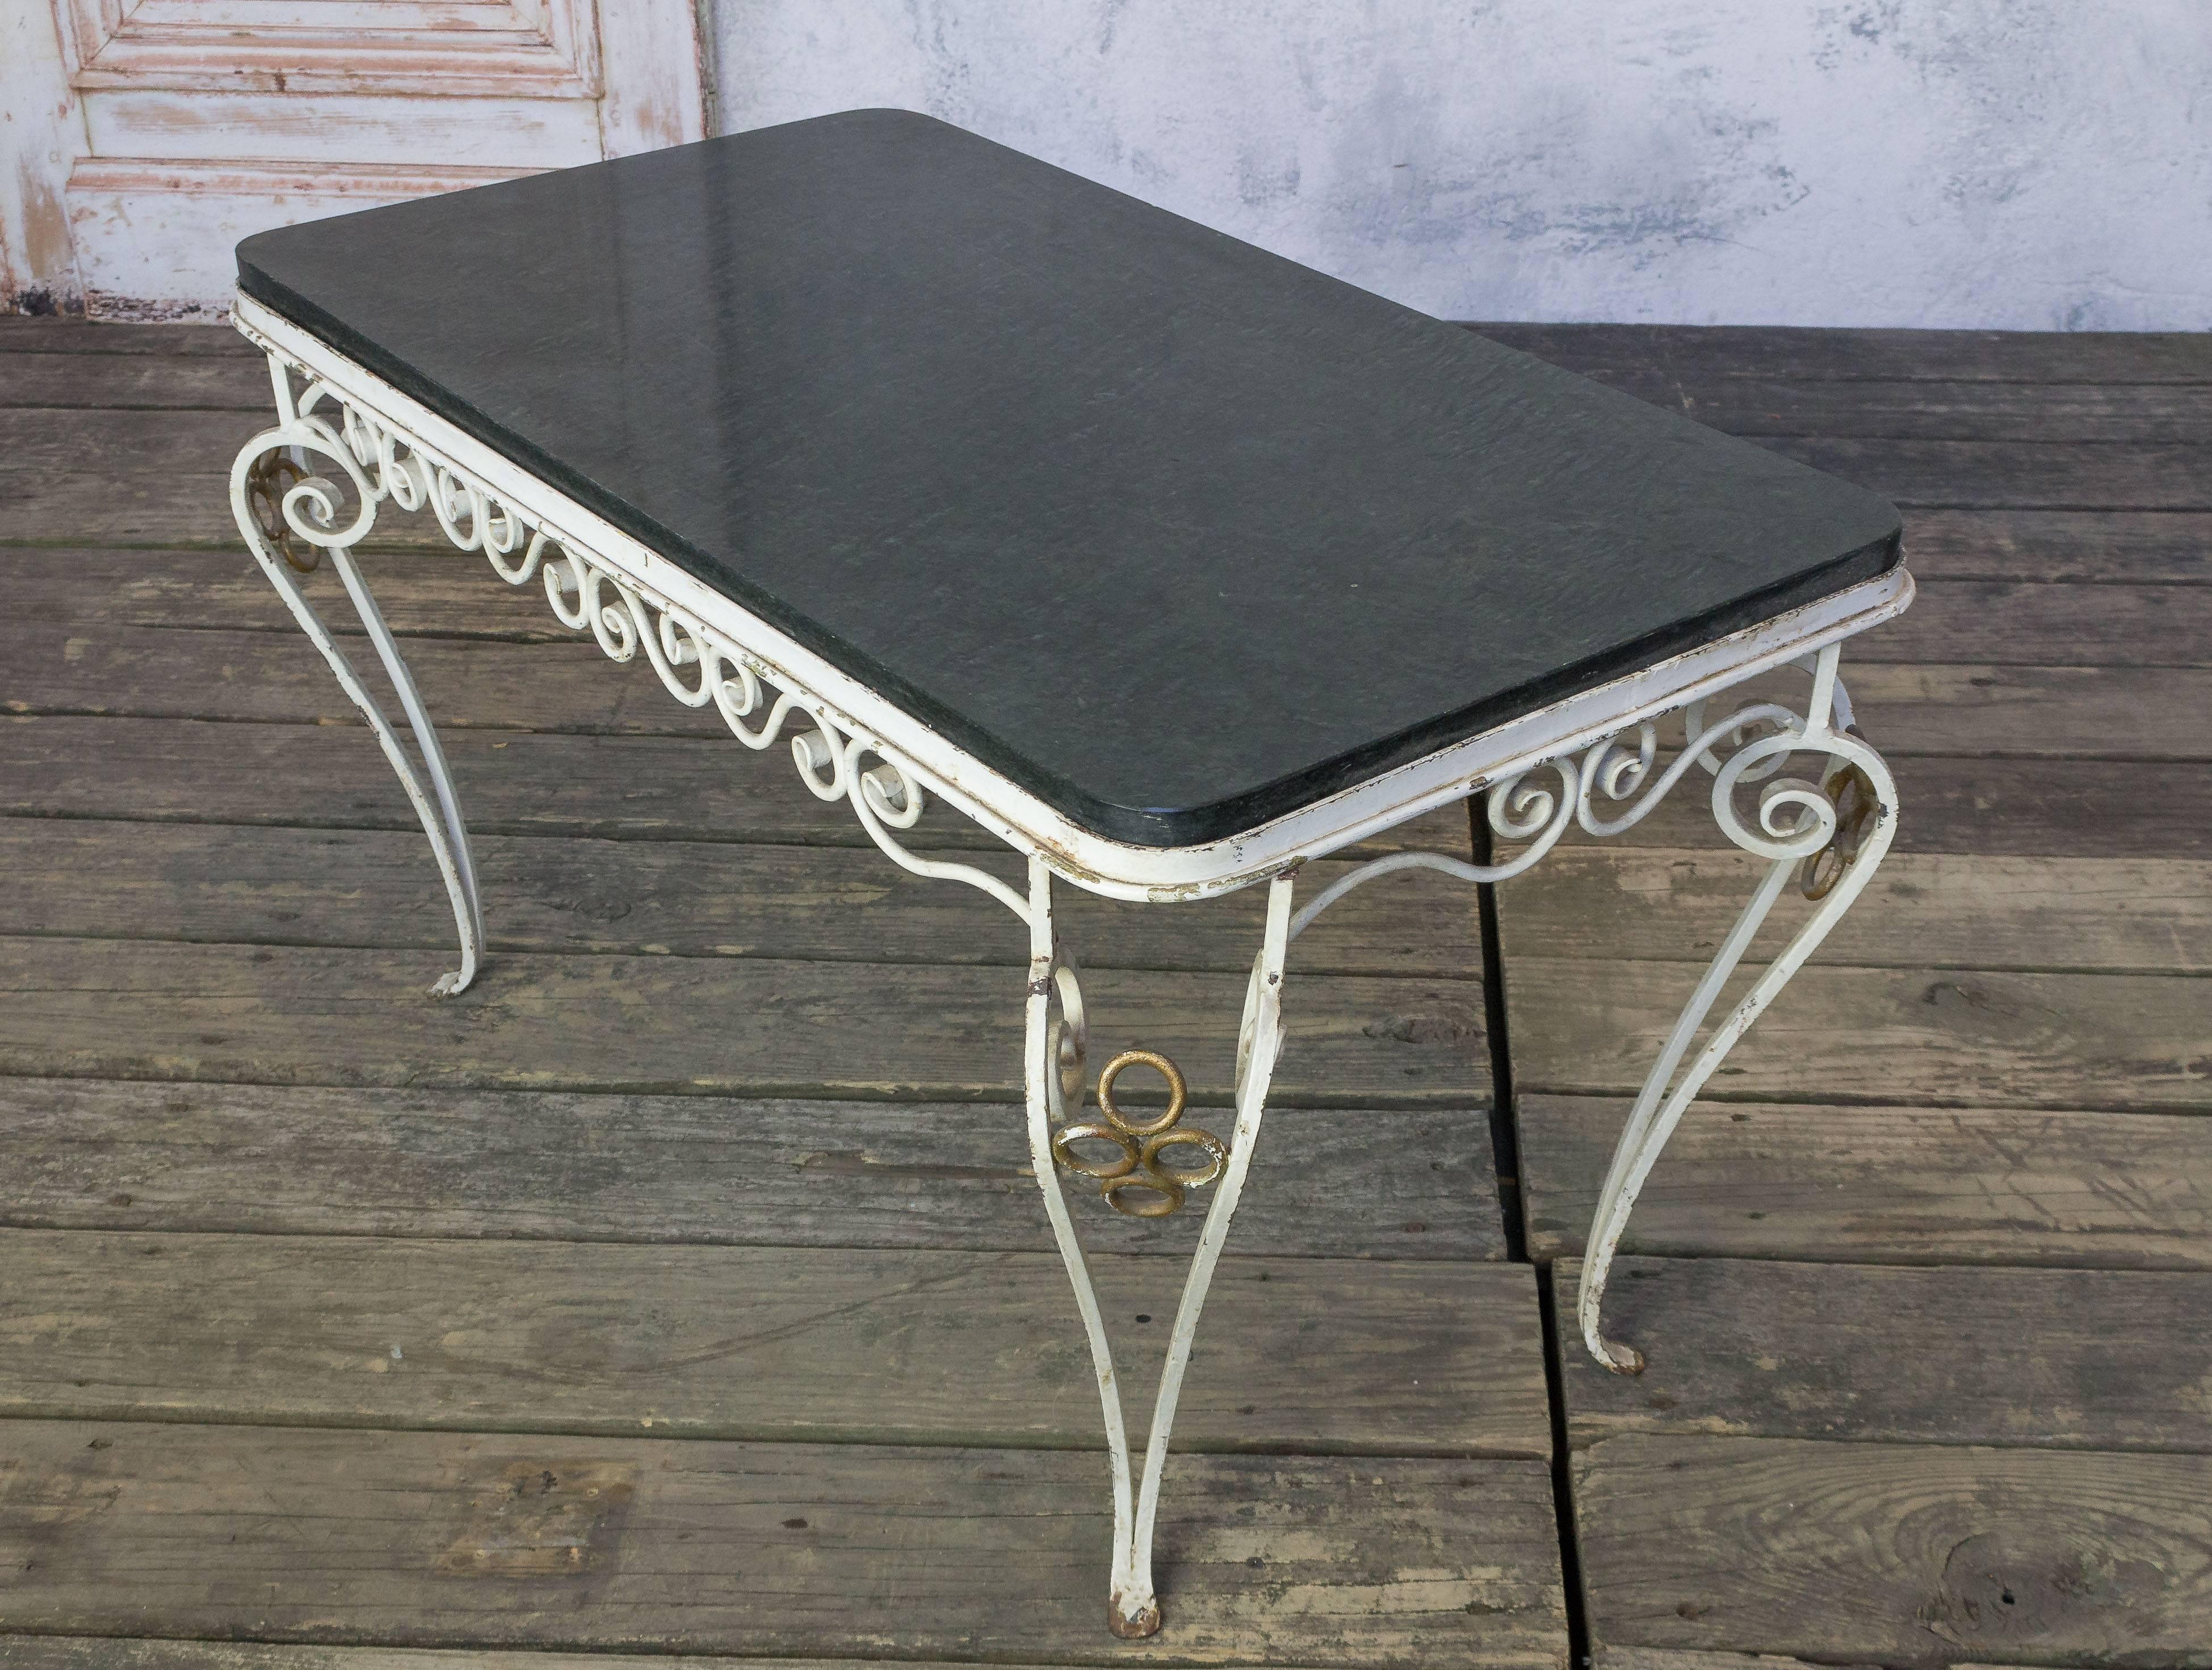 This French 1940s coffee table features a wrought iron frame with a black marble inset top, creating a classic and elegant look. The scrolled iron frame is painted in white with gilt accents, adding a touch of sophistication to the design.

In good